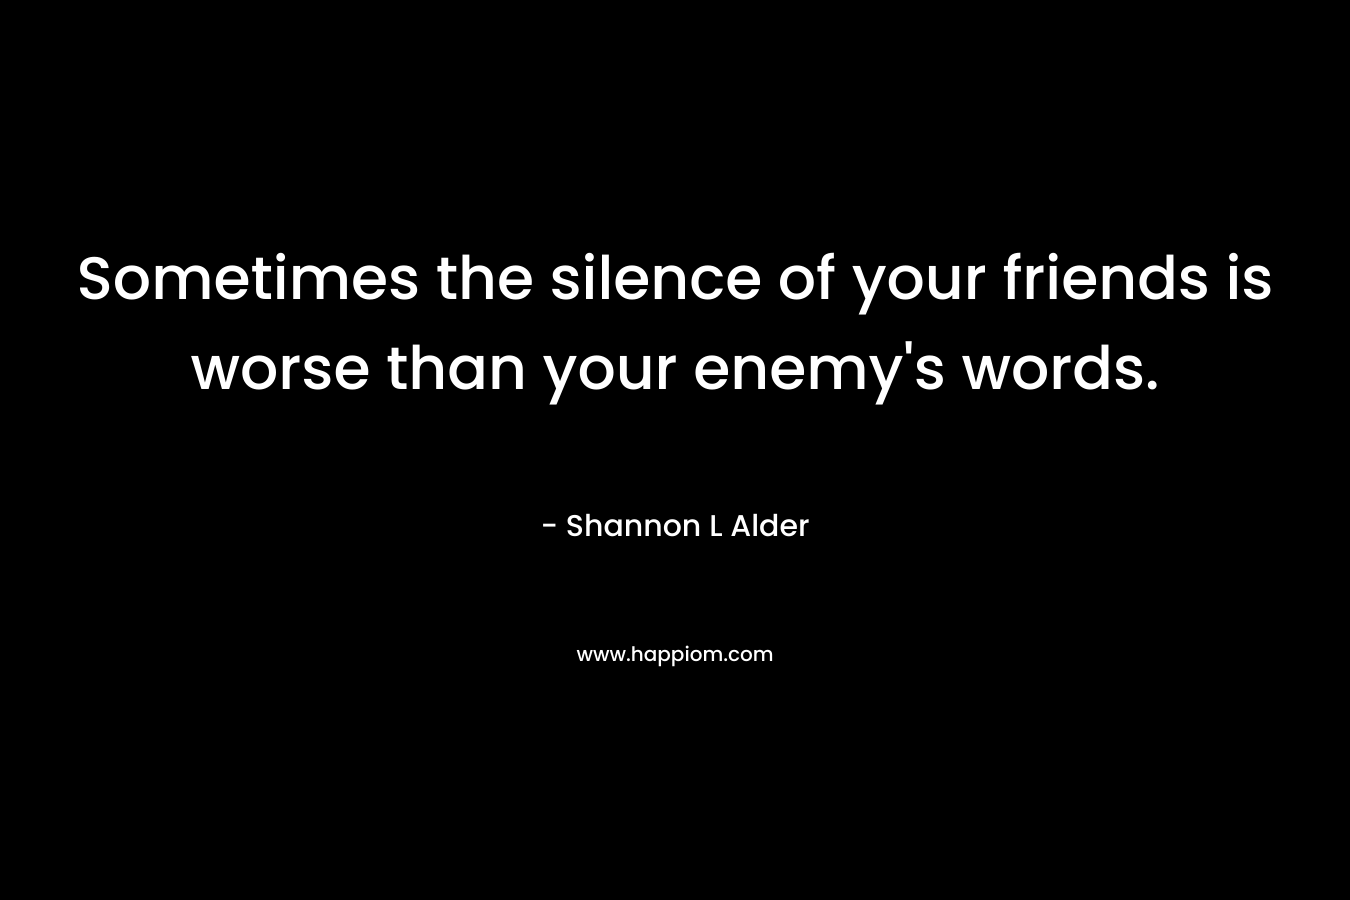 Sometimes the silence of your friends is worse than your enemy's words.